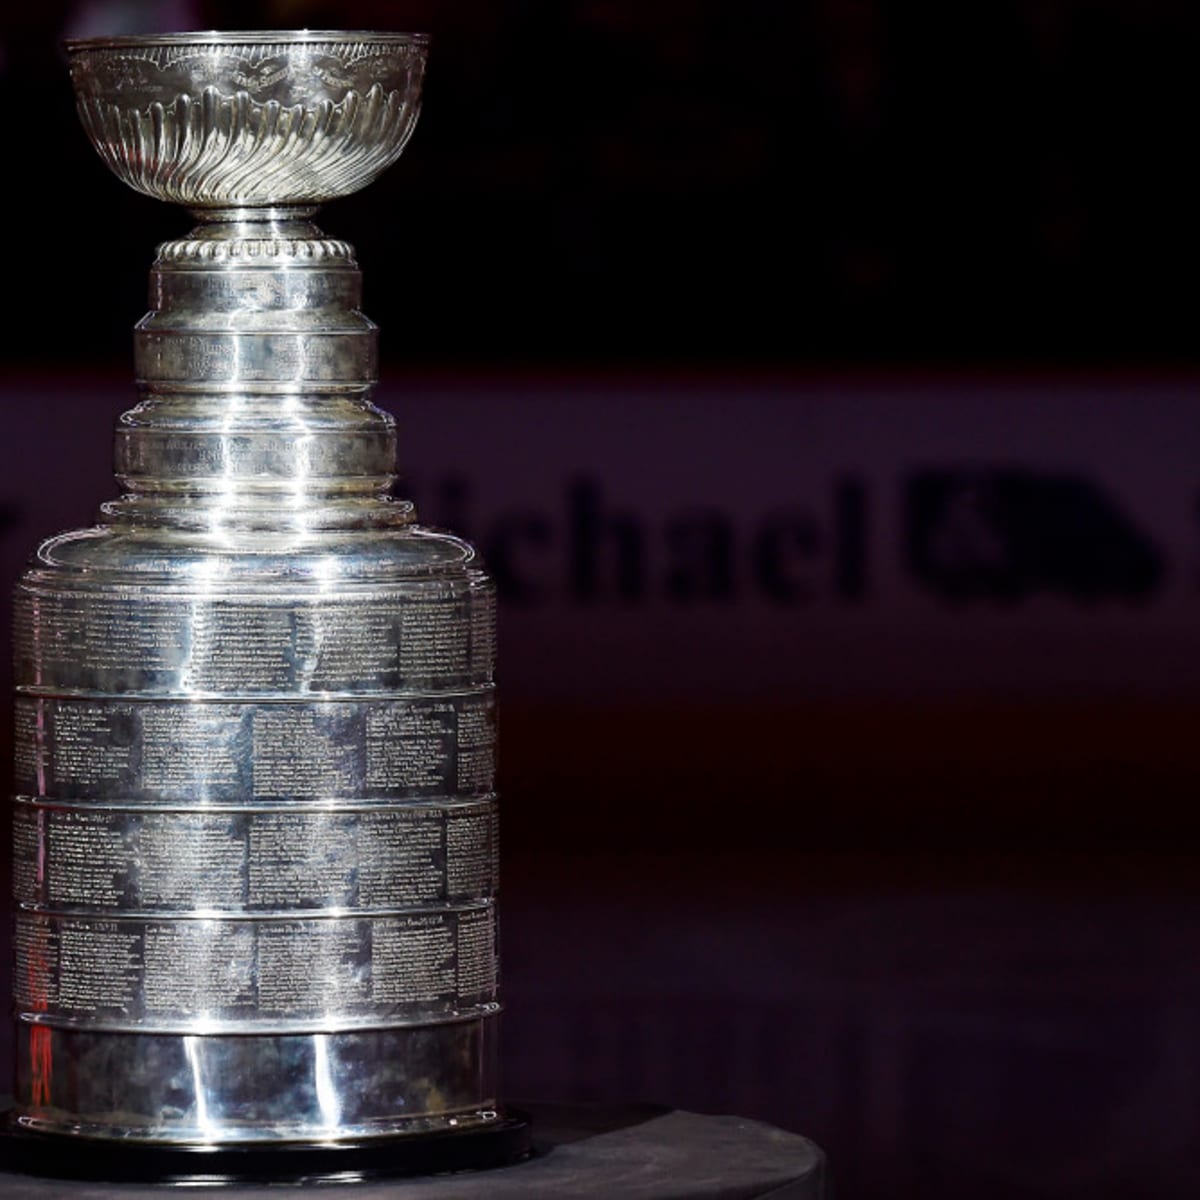 Why your beer league team won't play for the Stanley Cup during NHL lockout